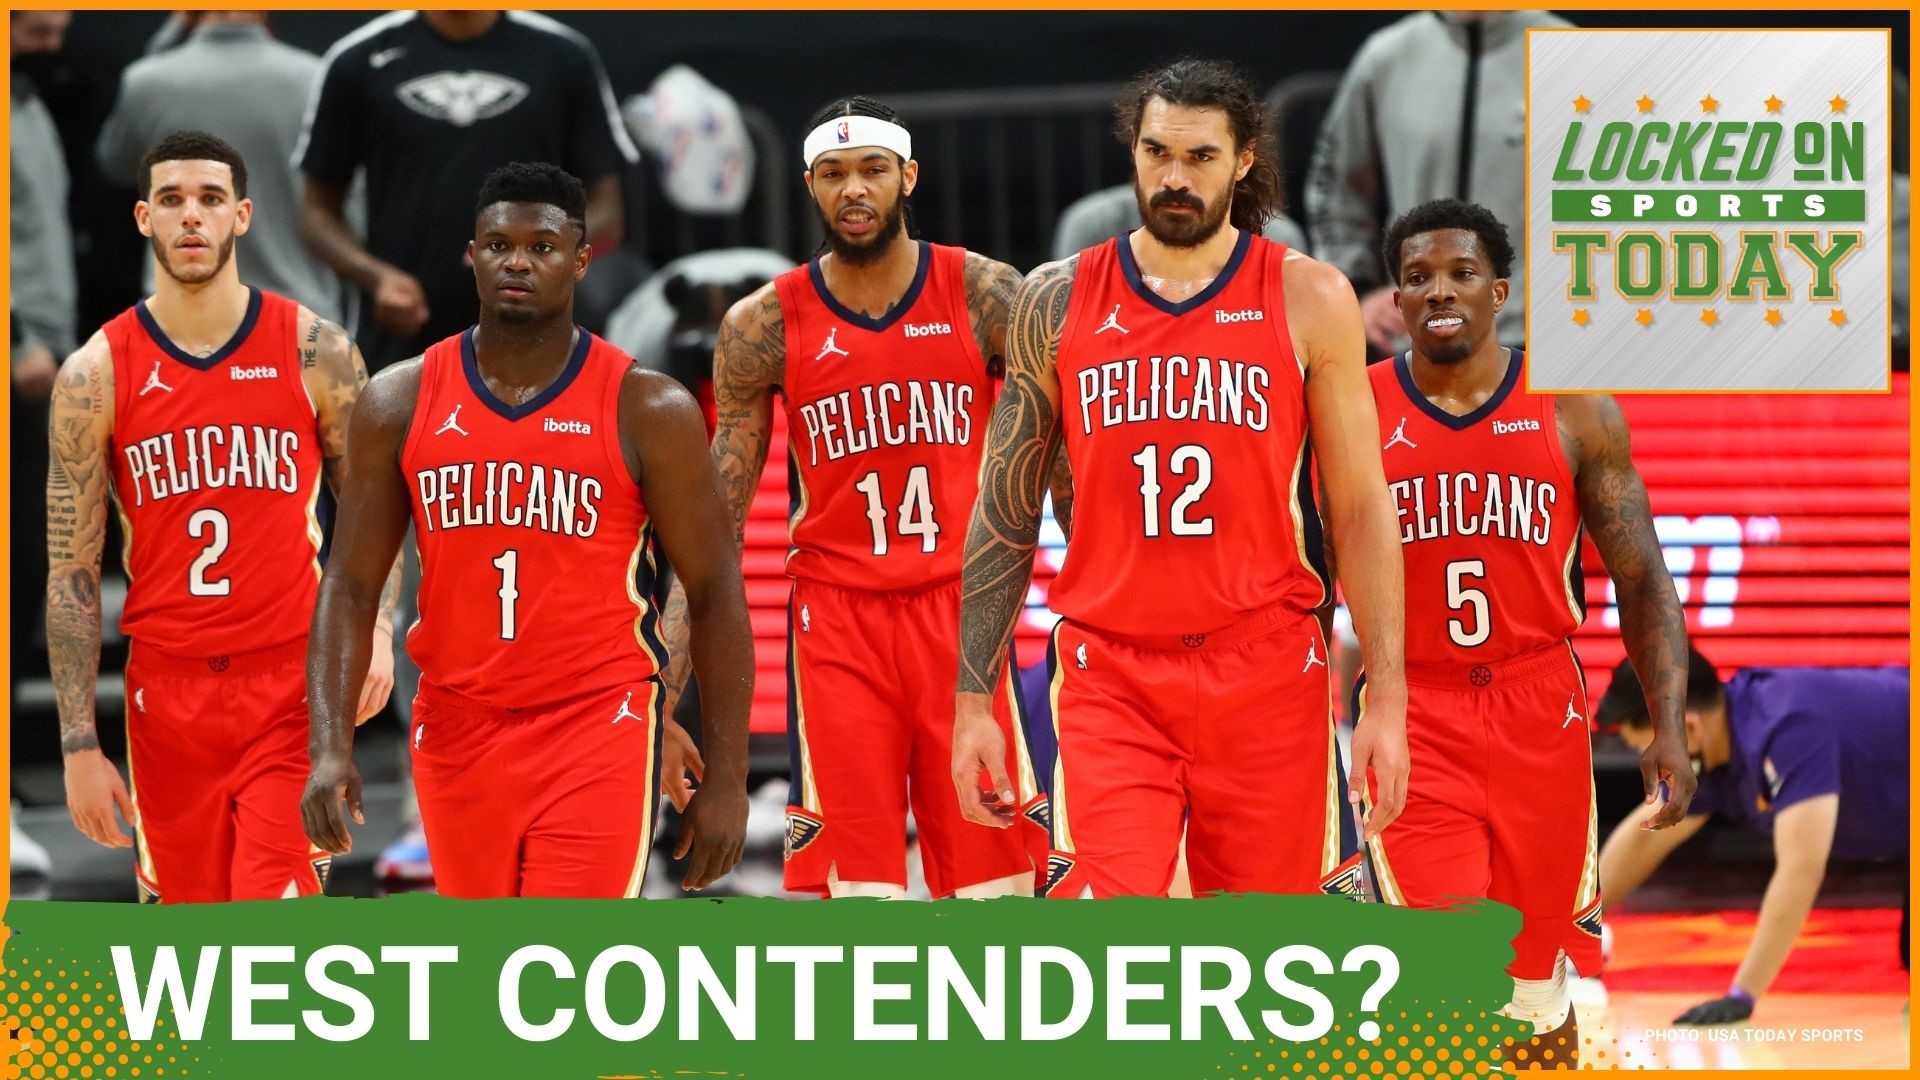 Discussing the day's top sports stories from debating if the Pelicans are Western Conference contenders to the inside scoop at the NFL combine.